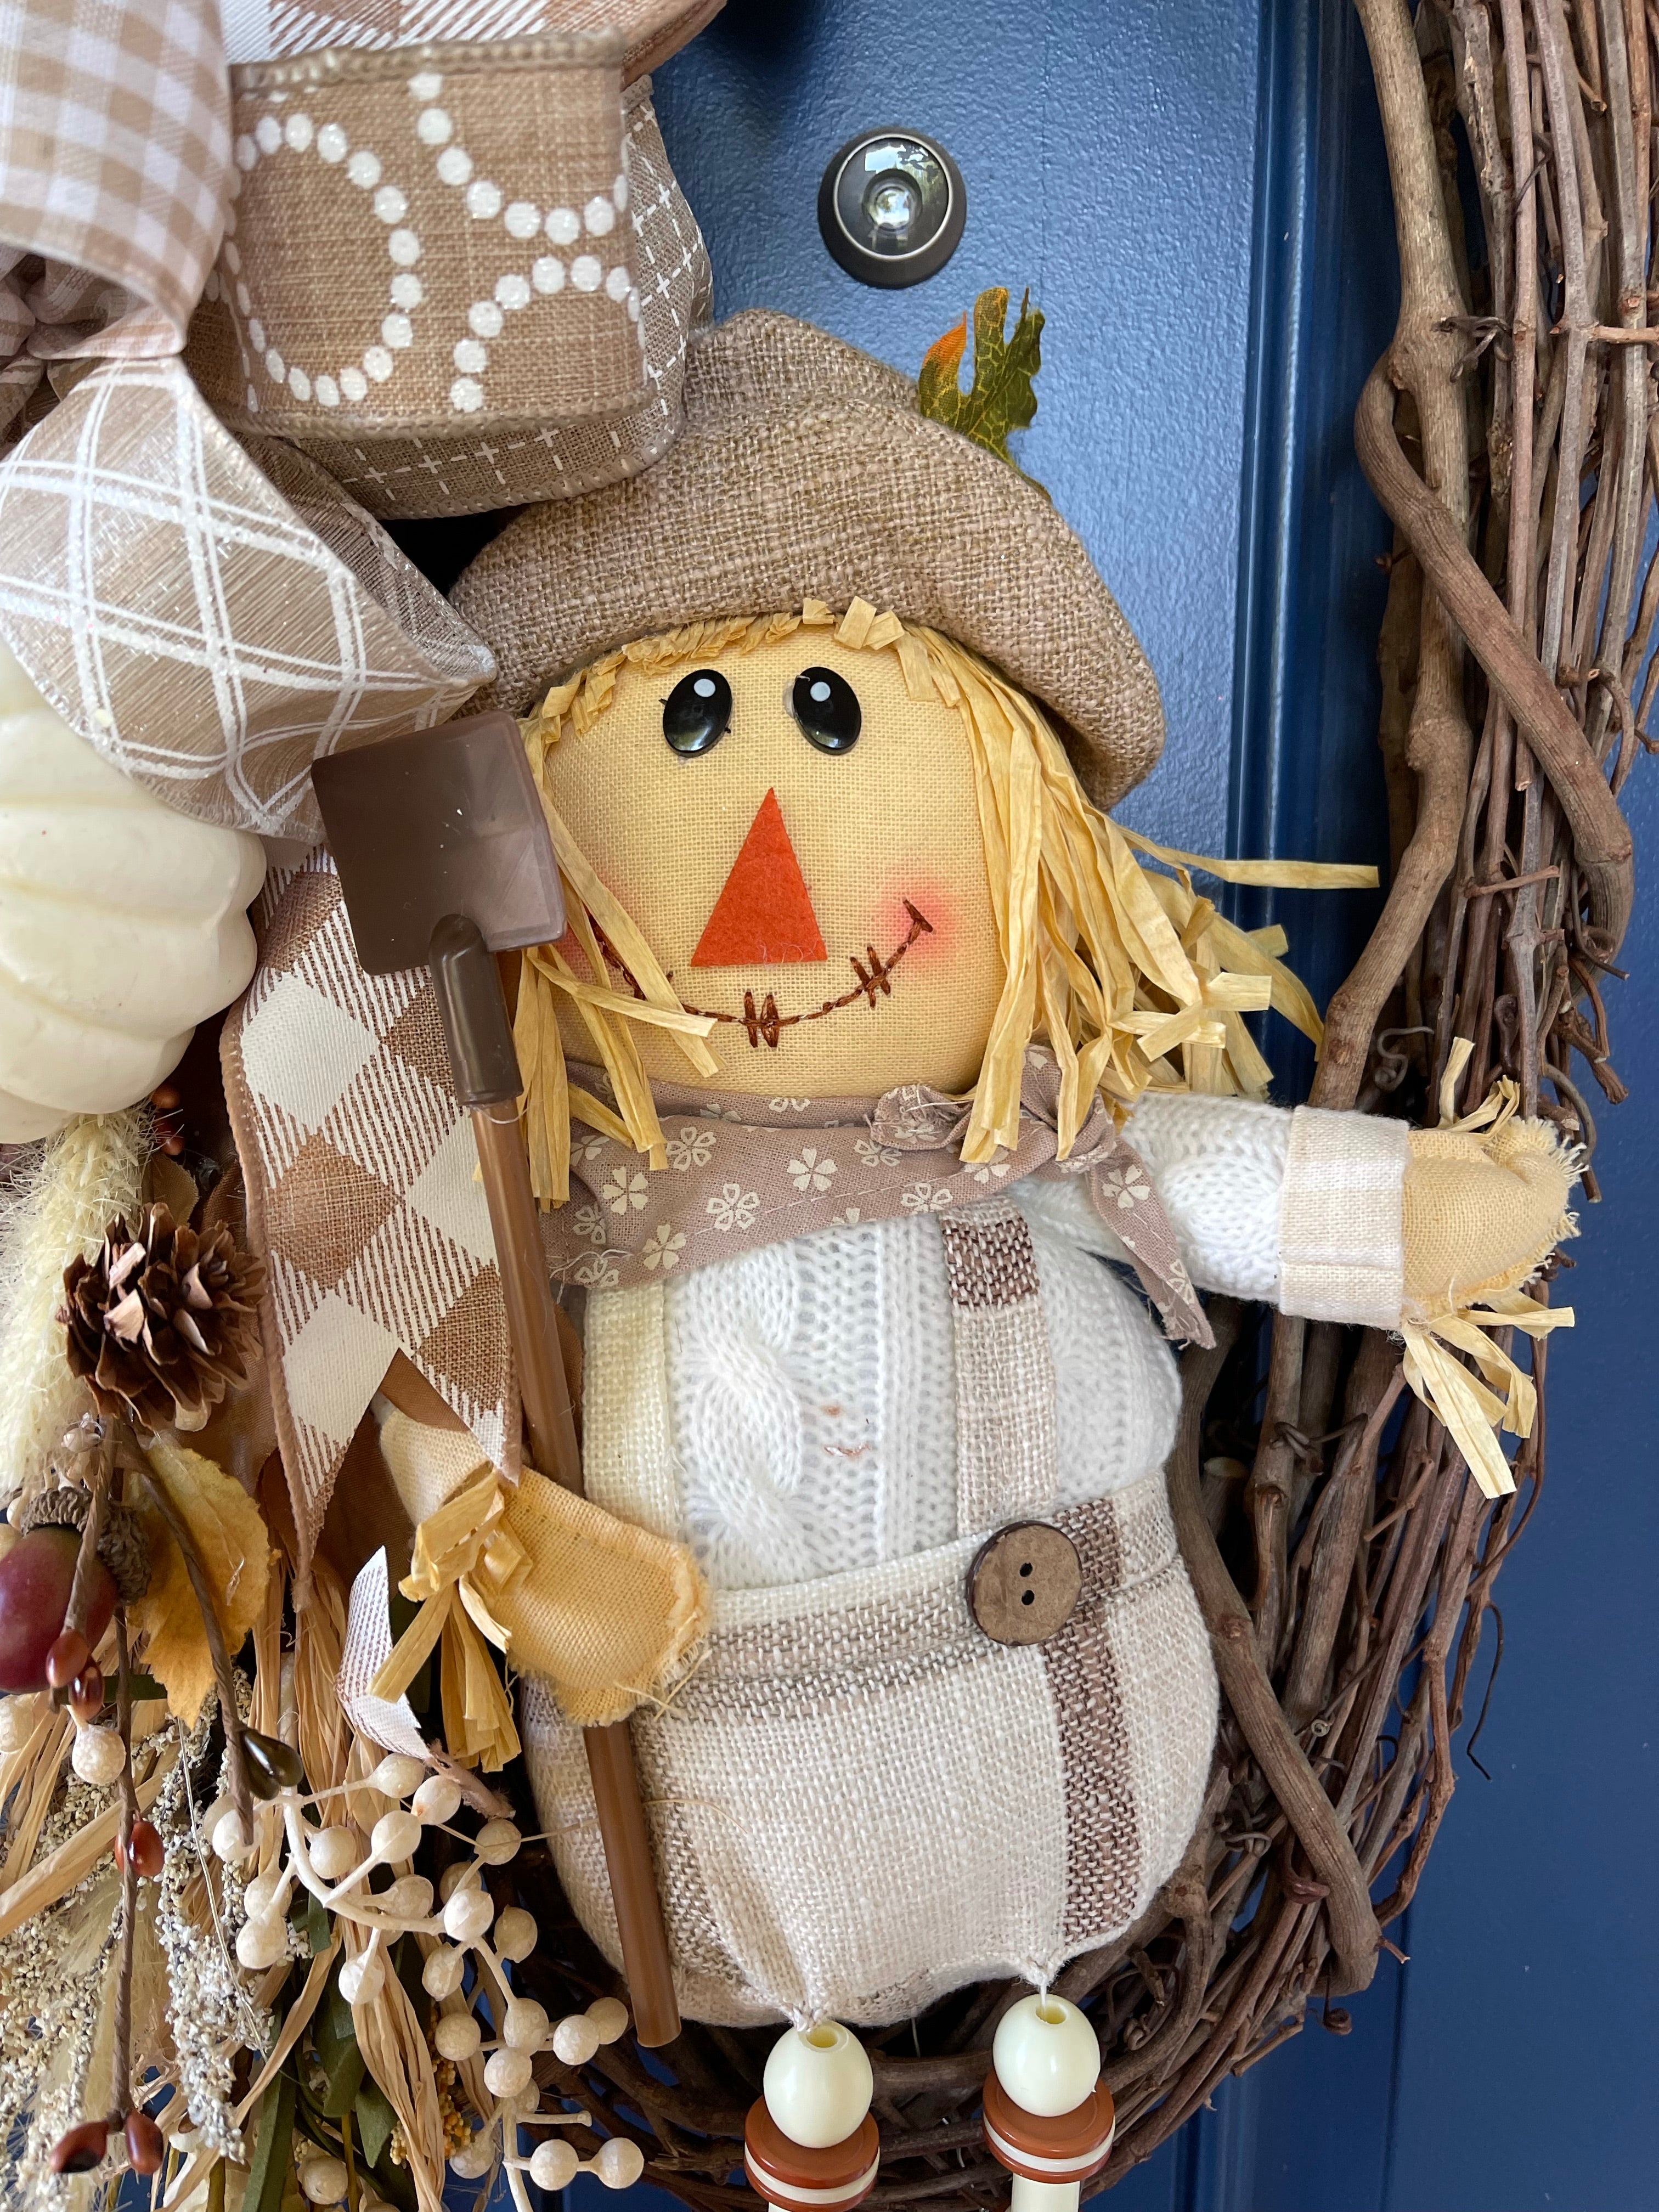 White and Tan Plush Scarecrow wearing overalls holding a shovel on a grapevine wreath